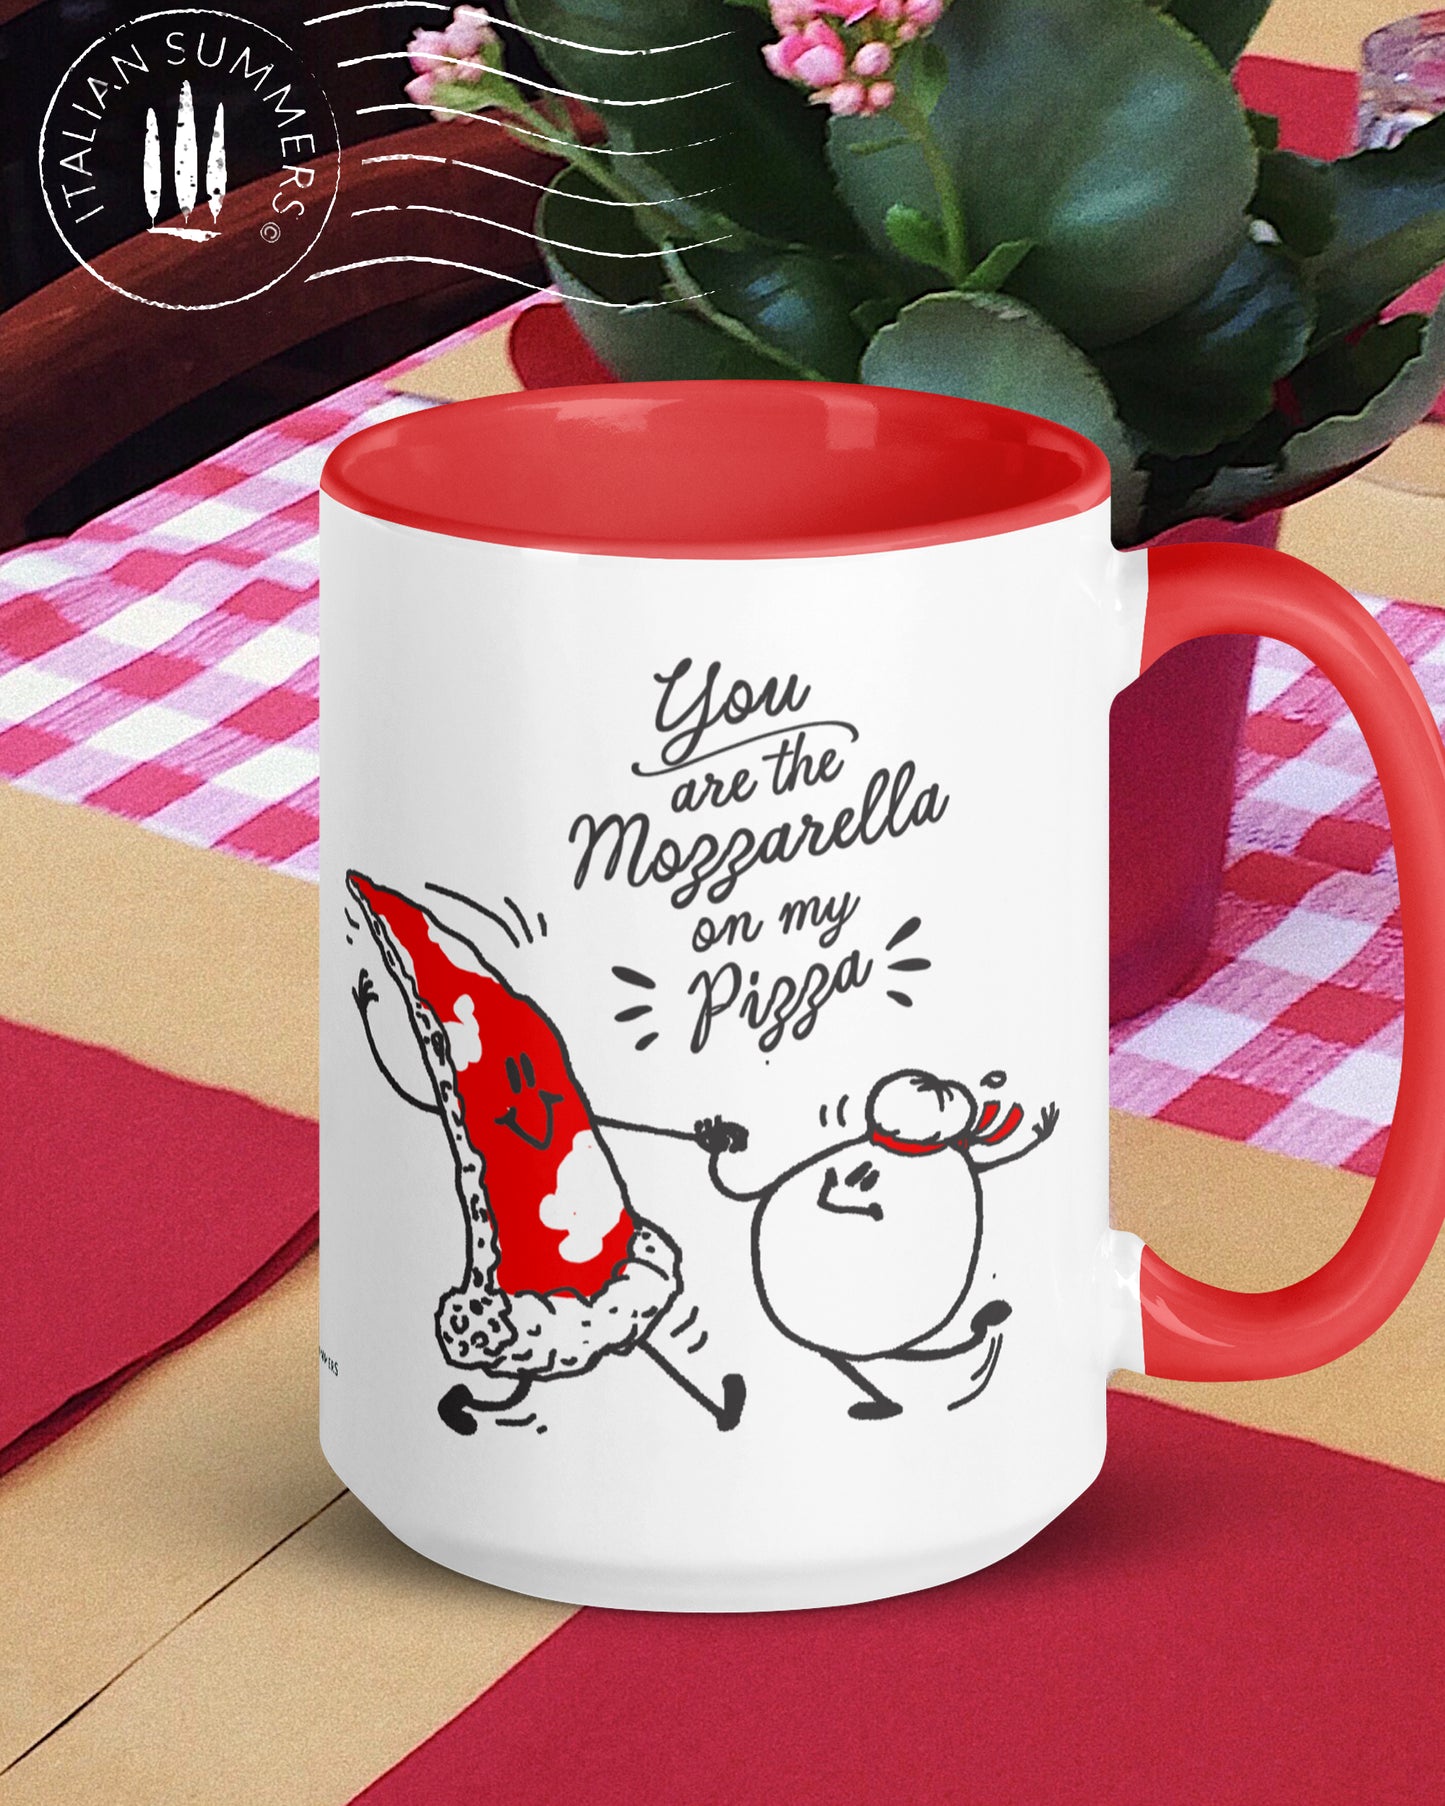 Italy inspired mug for pizza lovers with the quote "You are the mozzarella on my pizza" with a cute sketch of a dancing pizza slice and mozzarella both with a smiling face. Available in 11 and 15oz. Designed and sold by Italian Summers